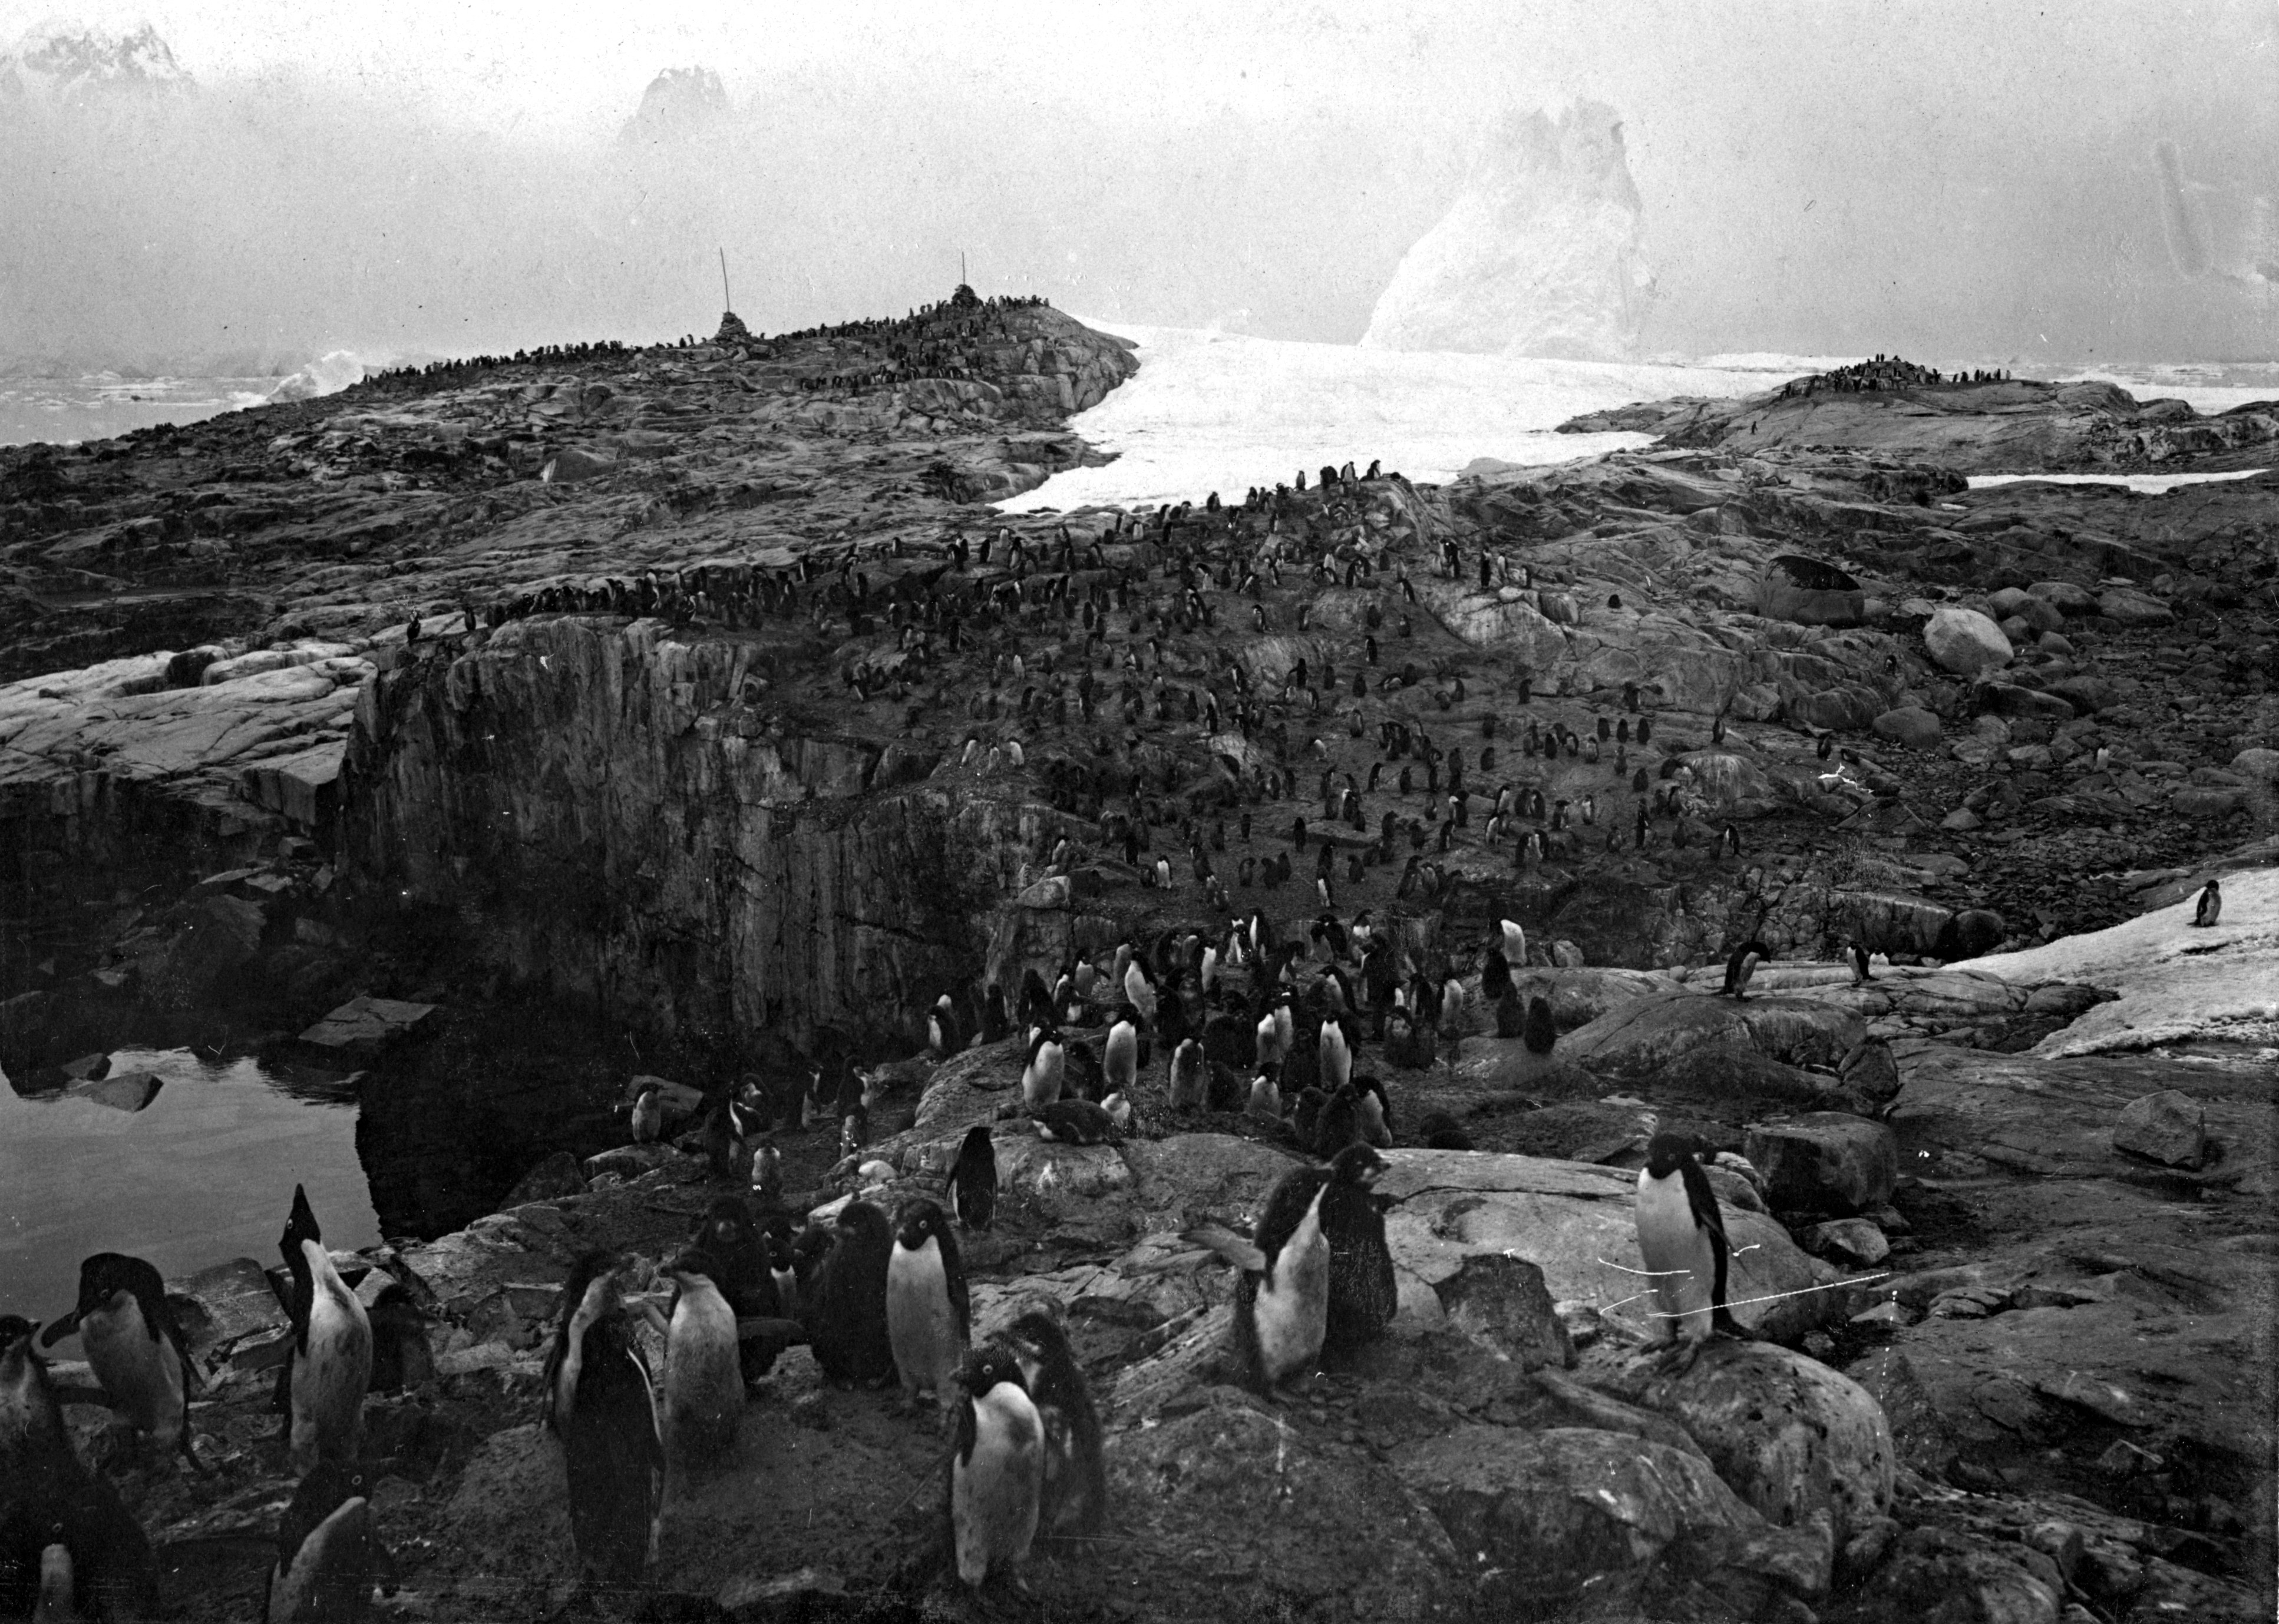 An Adelie penguin colony at Petermann Island during the Charcot Expedition.